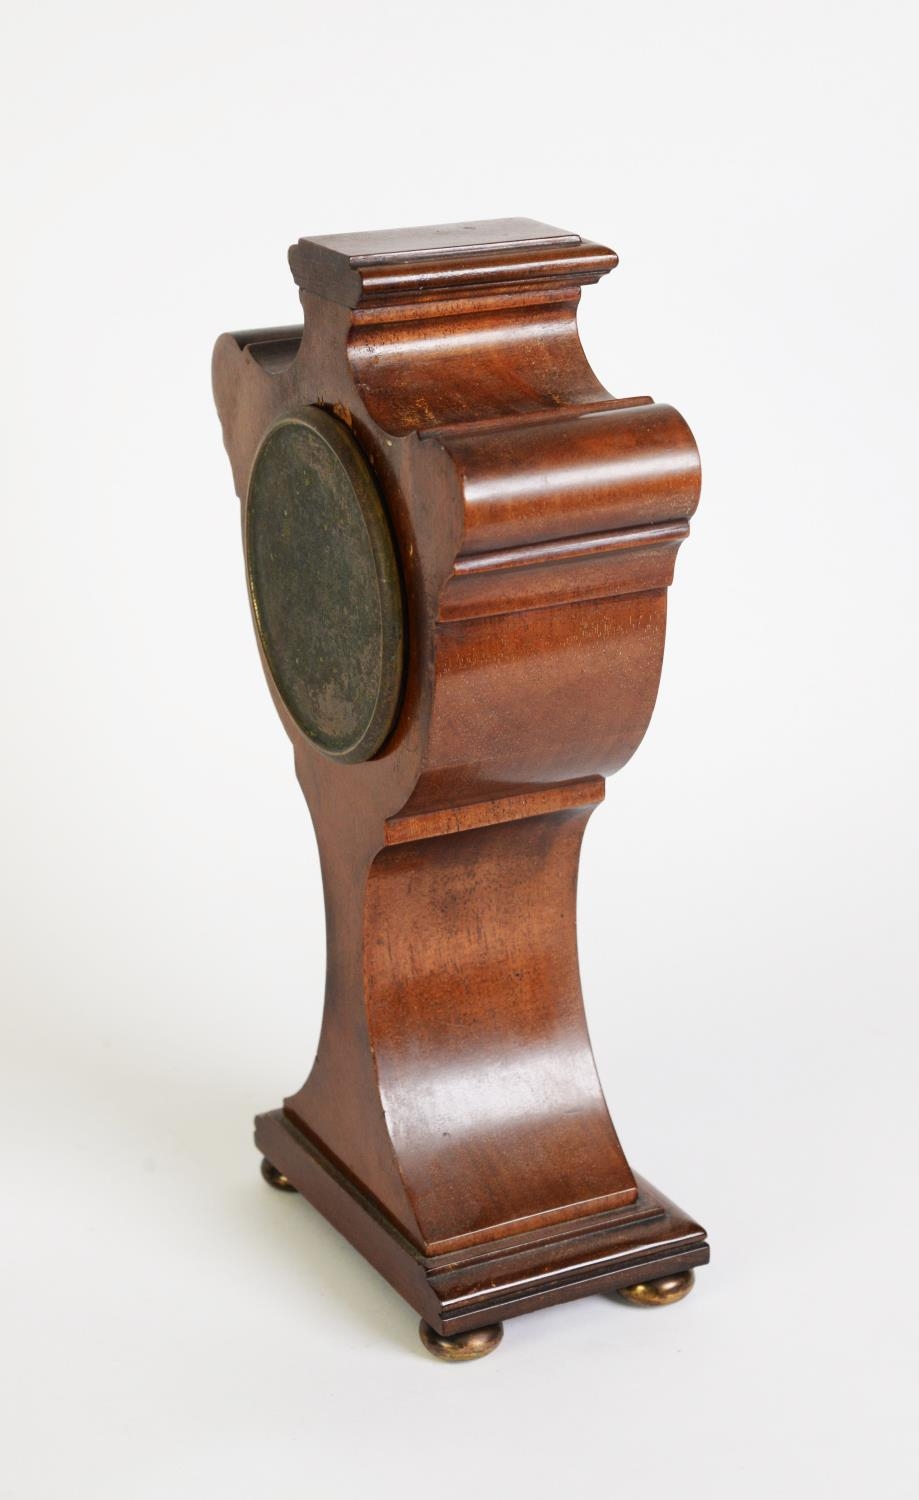 EDWARDIAN INLAID MAHOGANY MANTLE CLOCK, with 3 ½” Arabic dial, drum shaped movement by Duverdry & - Image 2 of 2